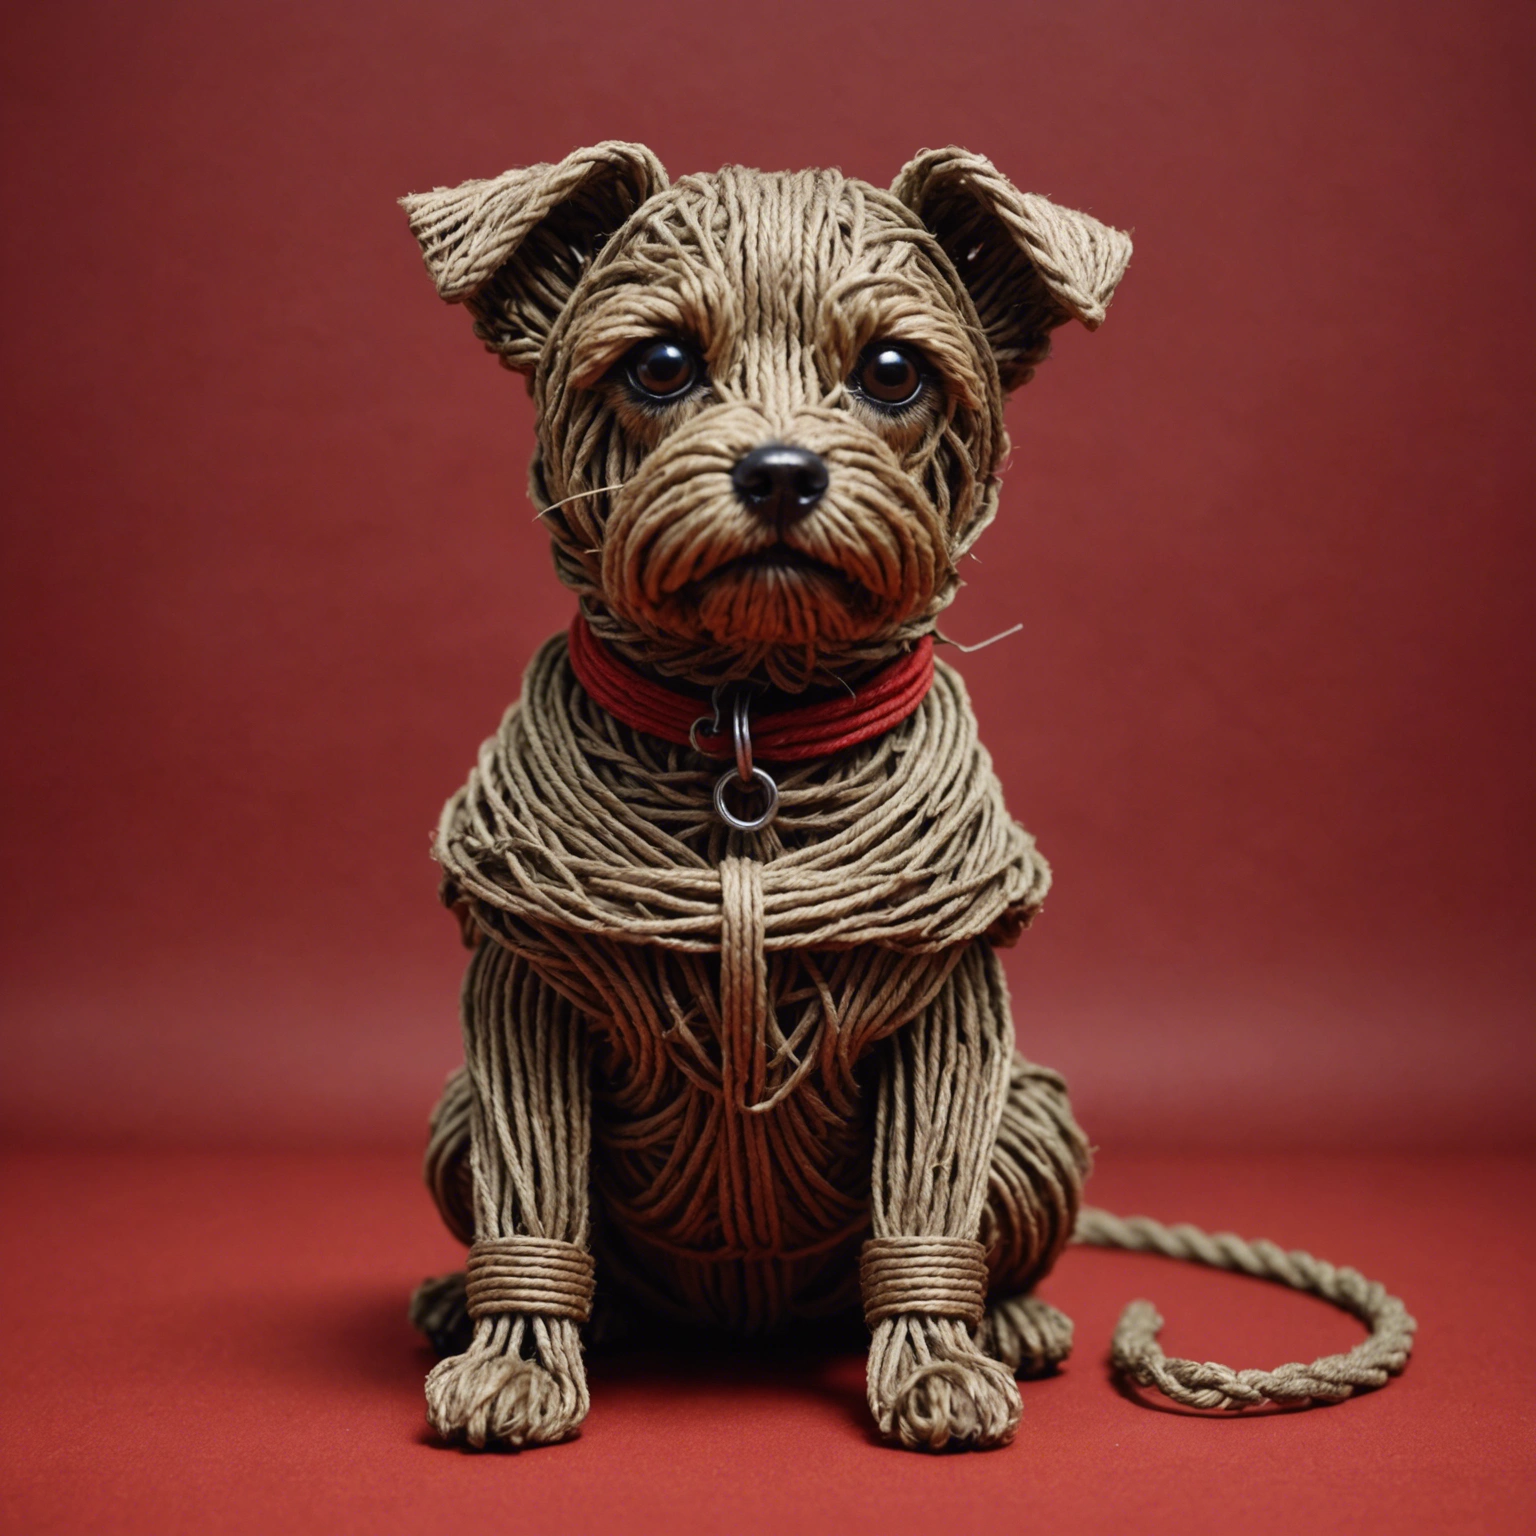 A small dog model made of rope, garbage, and iron 